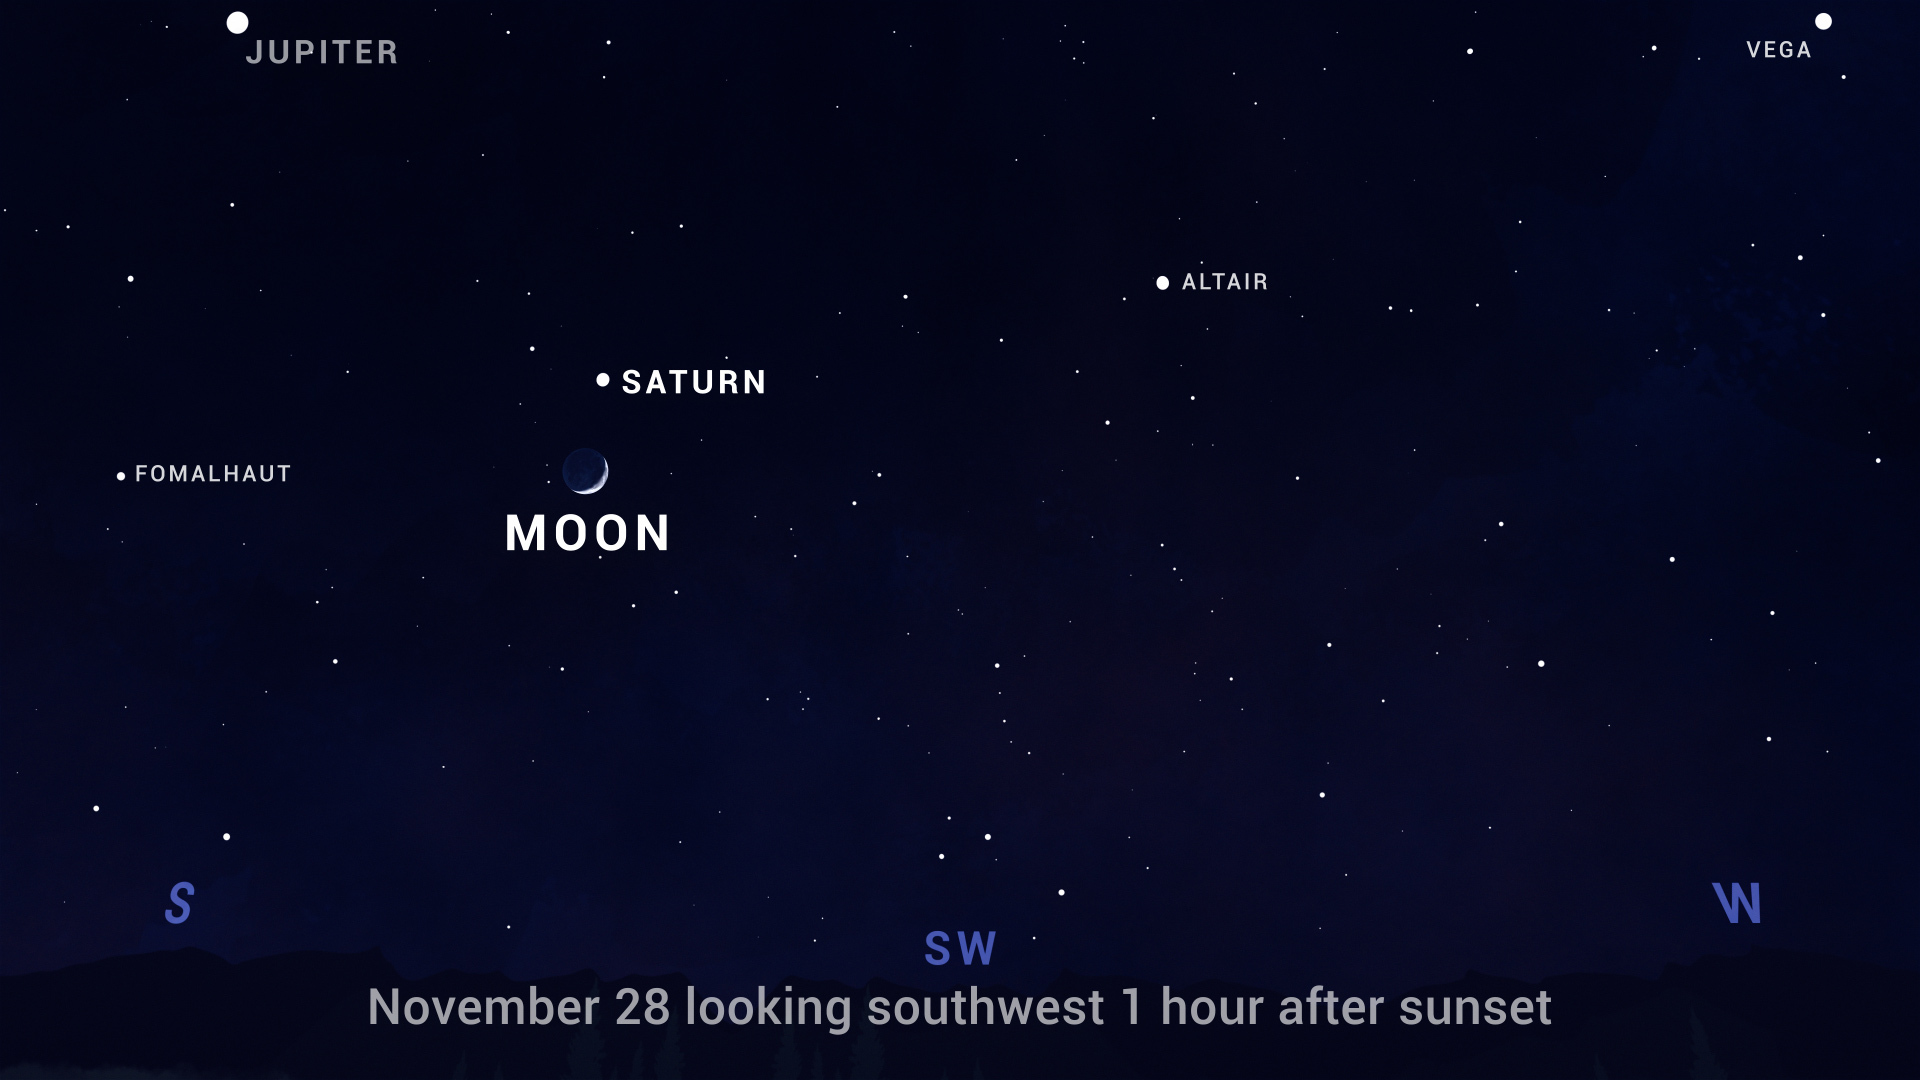 An illustration of the night sky shows the positions of the stars facing southwest after dark on November 28. The crescent Moon appears directly beneath Saturn.